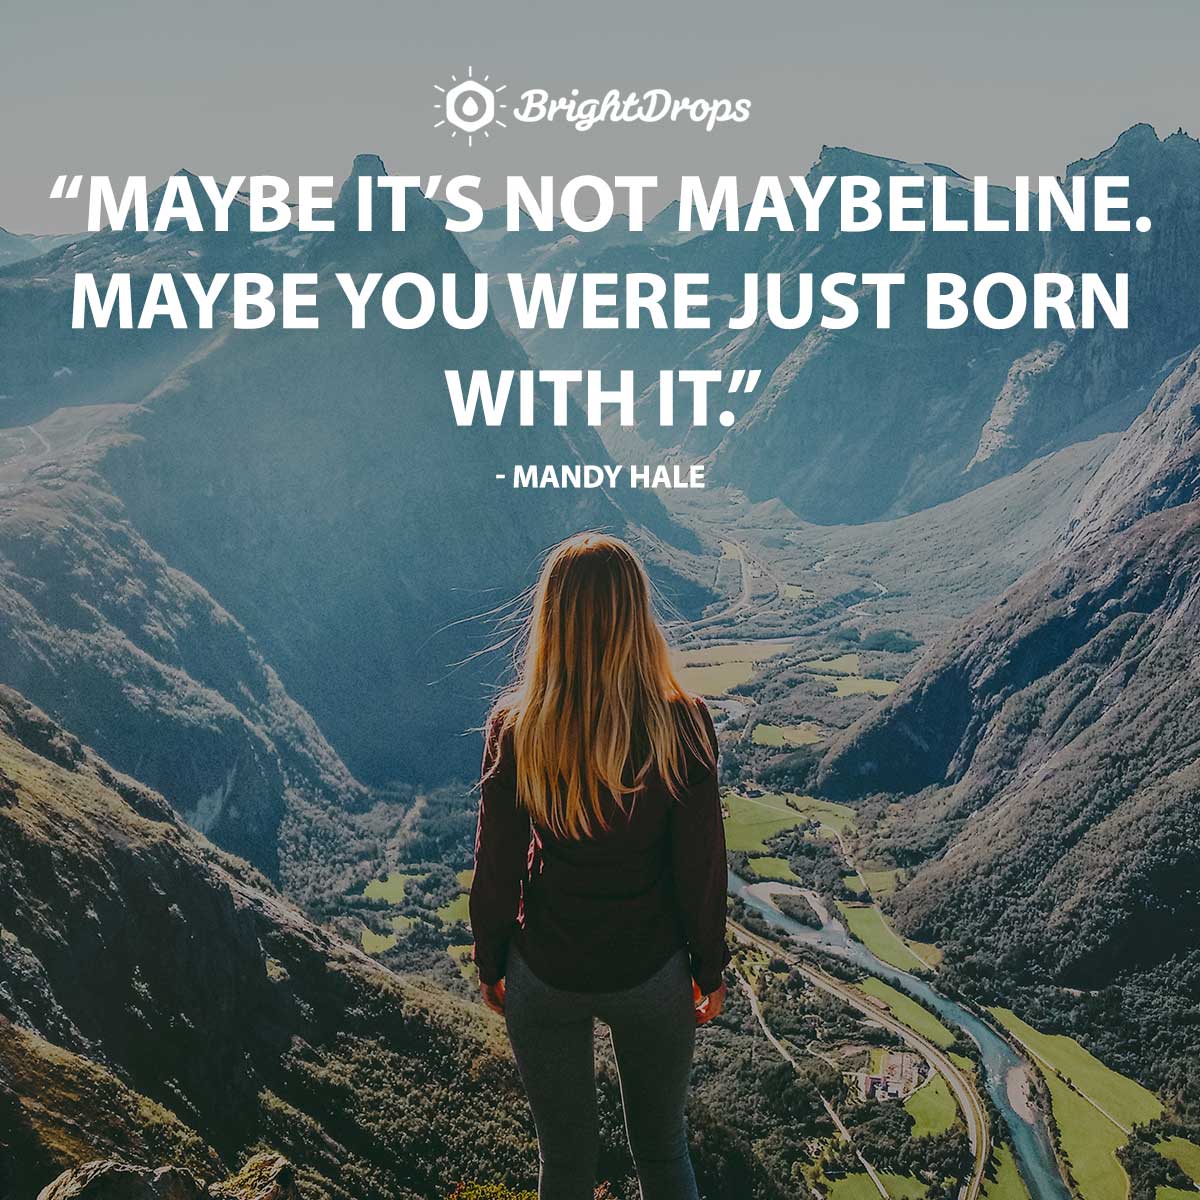 Maybe it’s NOT Maybelline. Maybe you were just born with it. - Mandy Hale